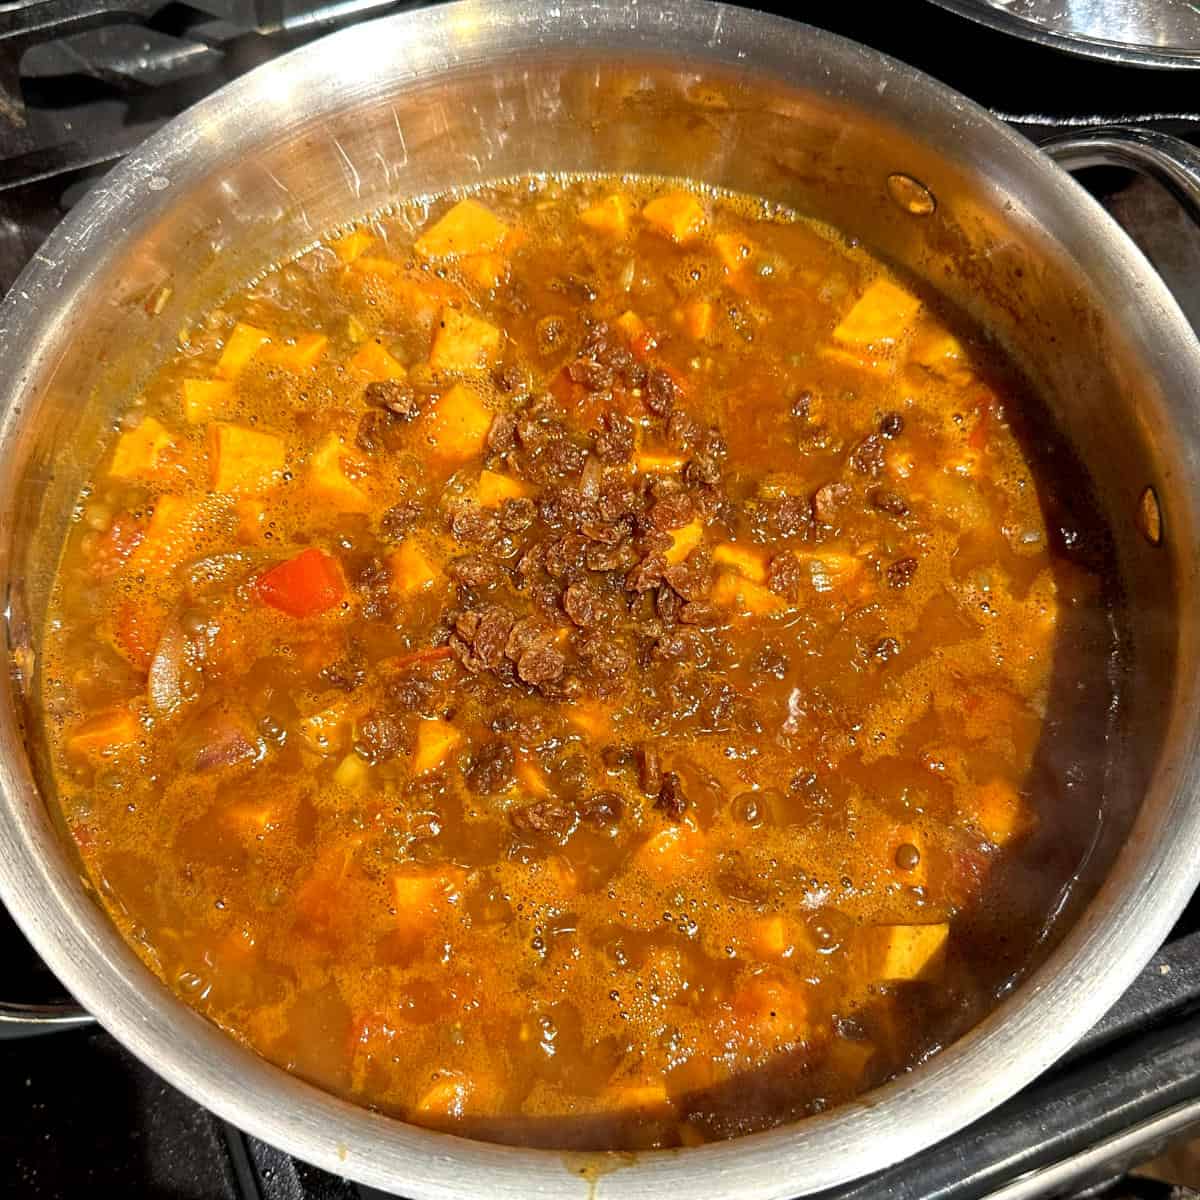 Lentils and sweet potatoes simmering for 15 minutes.